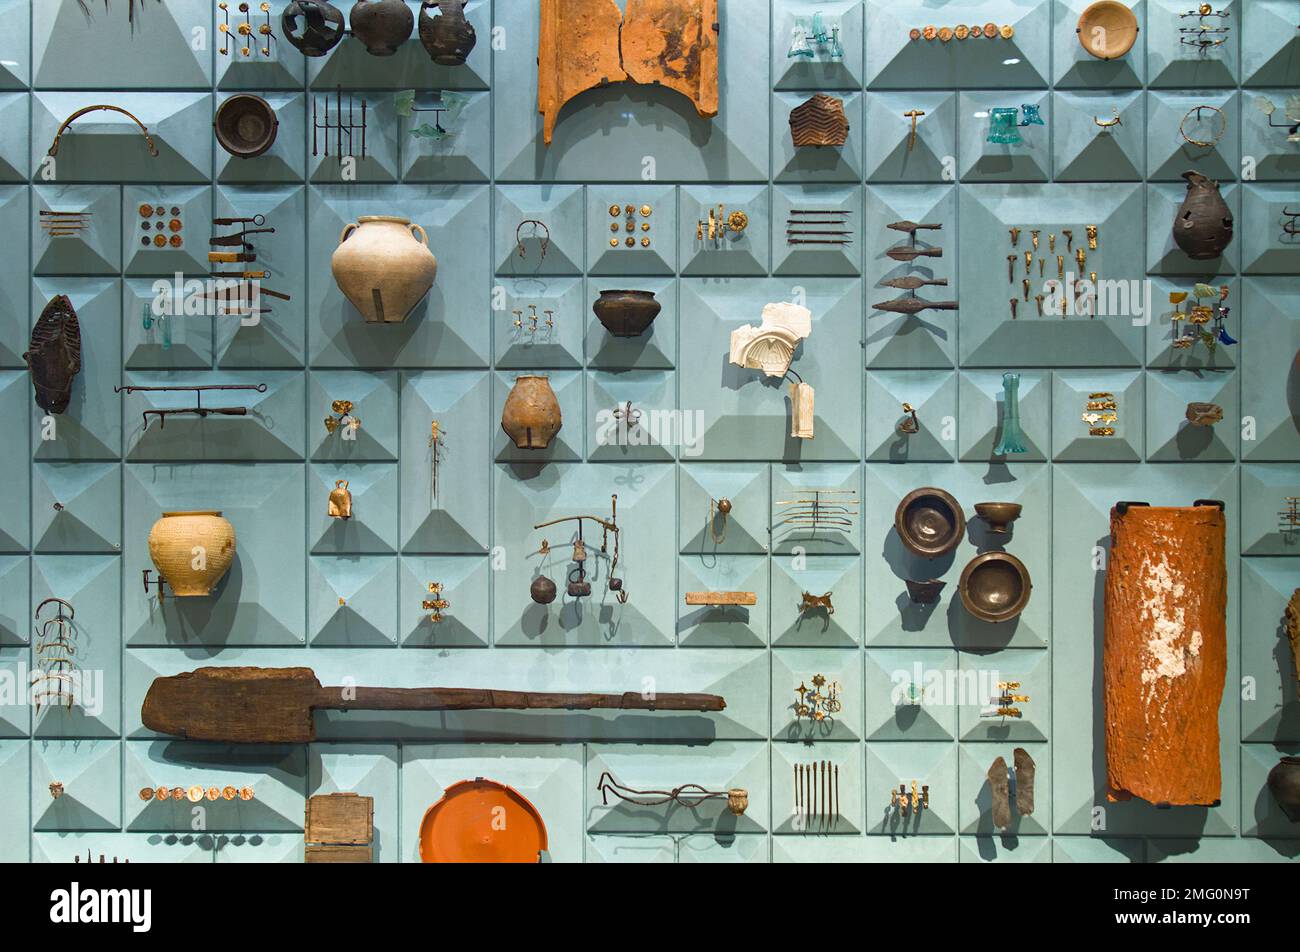 Display Of Roman Artifacts At The London Mithraeum Under The Bloomsberg Building, City Of London UK Stock Photo